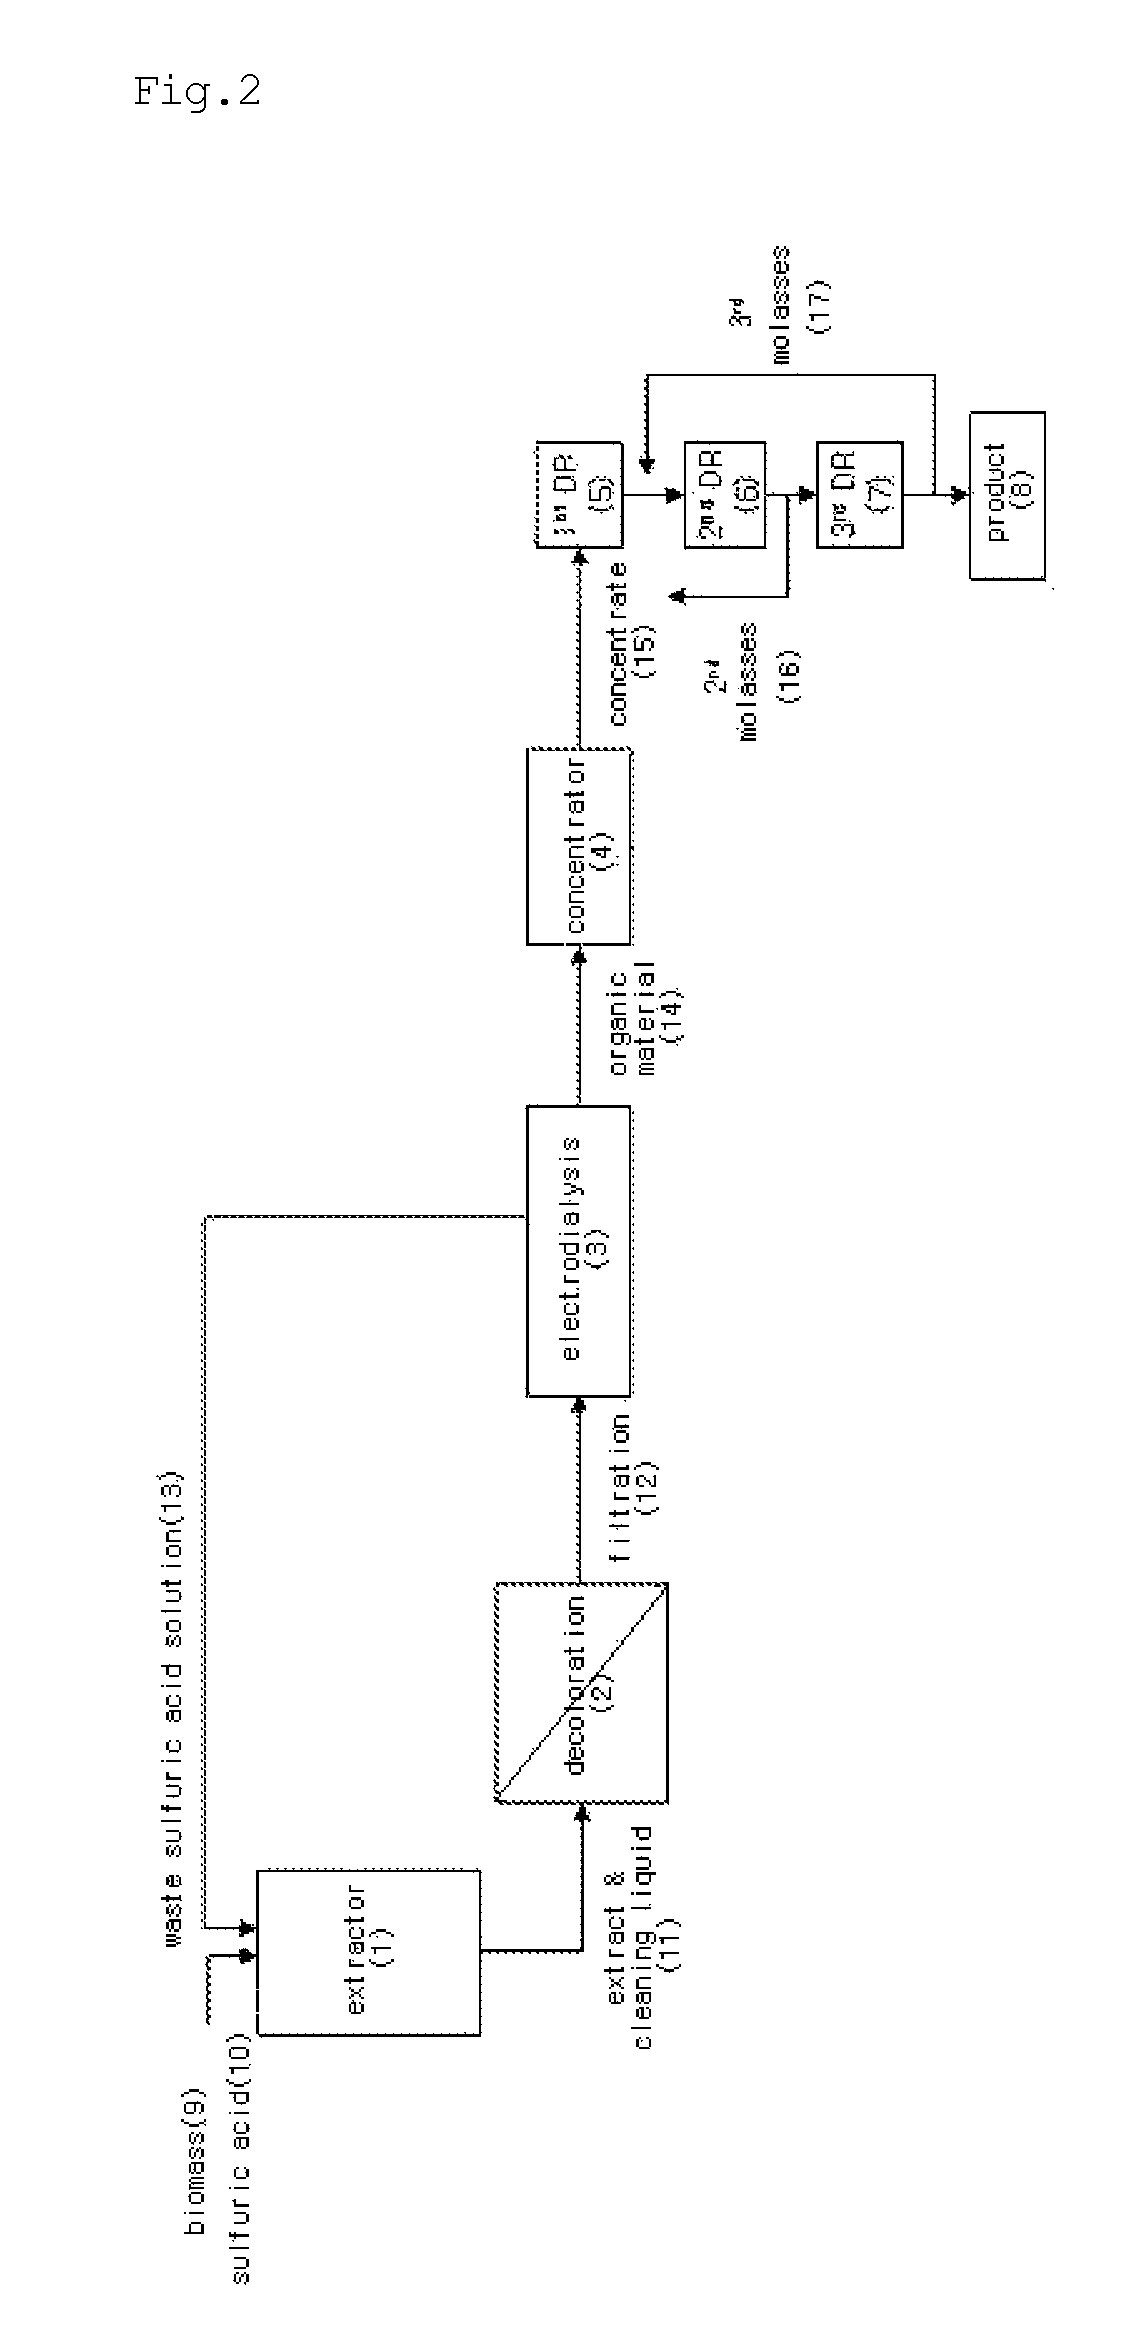 Economic process for producing xylose from hydrolysate using electrodialysis and direct recovery method